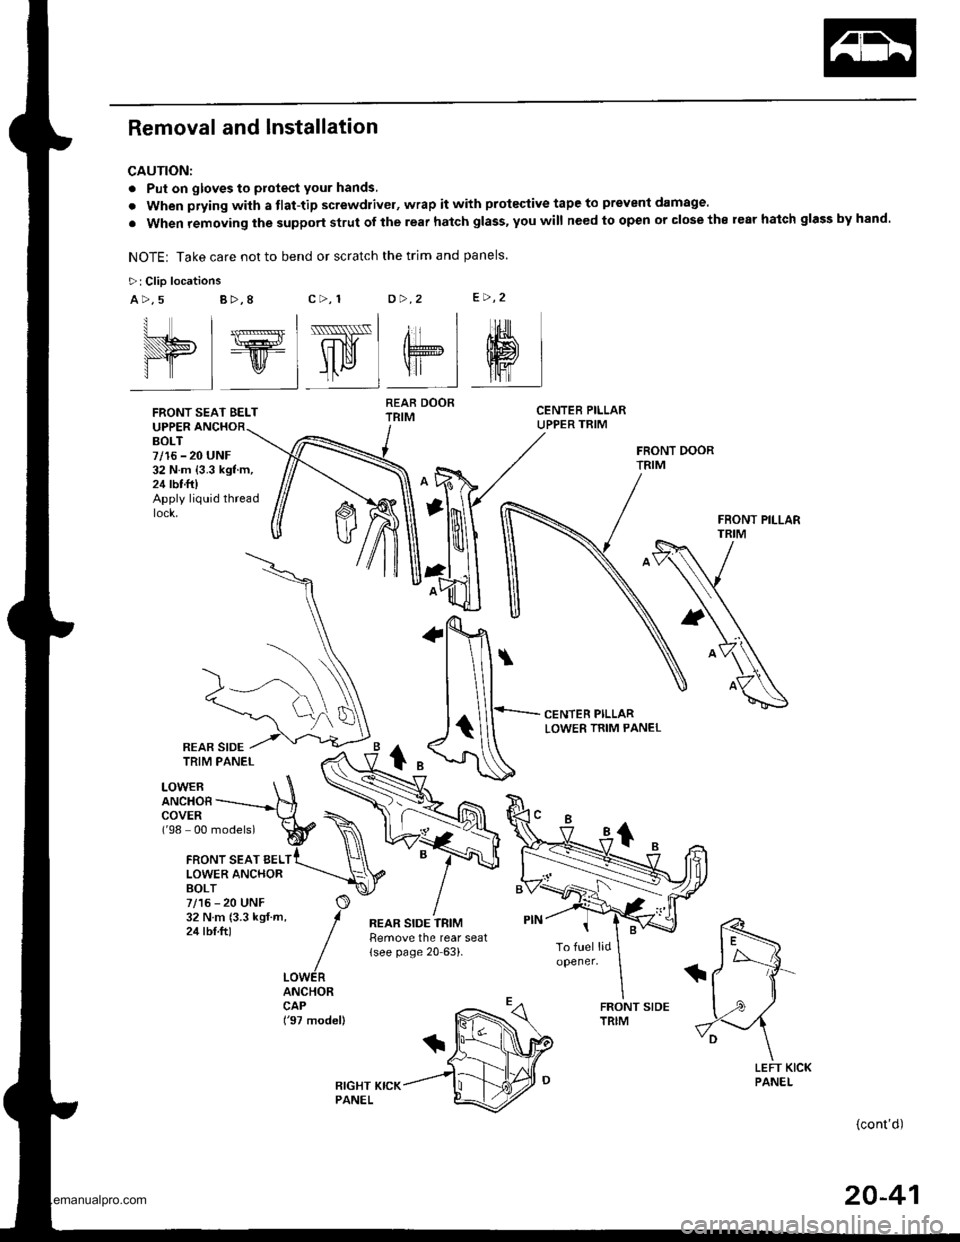 HONDA CR-V 1999 RD1-RD3 / 1.G Workshop Manual 
Removal and Installation
CAUTION:
. Put on gloves to protect your hands,
. When prying with a tlat-tip screwdrivel, wrap it with protective tape to prevent damage.
. When removing the support strut o